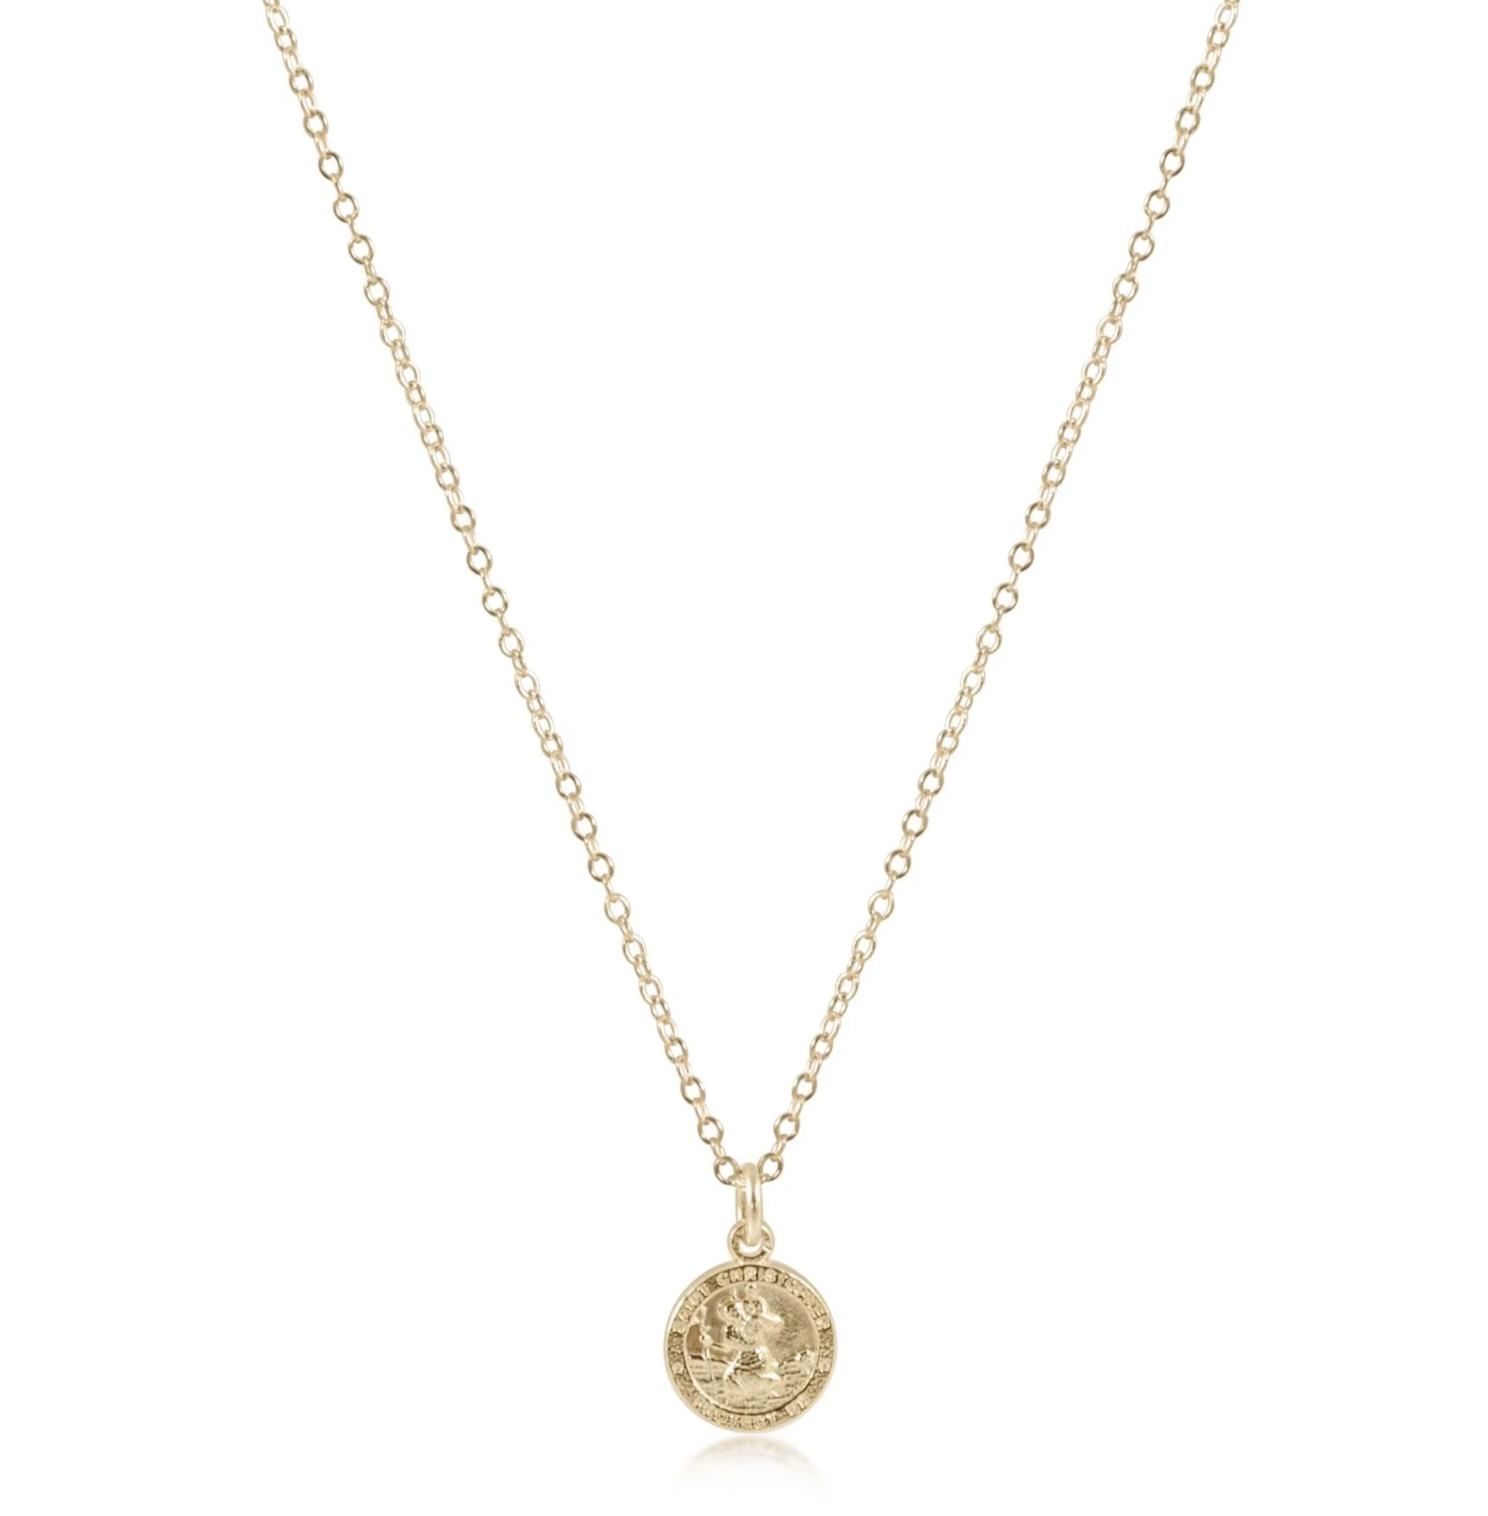 ENEWTON 16" NECKLACE GOLD-PROTECTION SMALL GOLD DISC